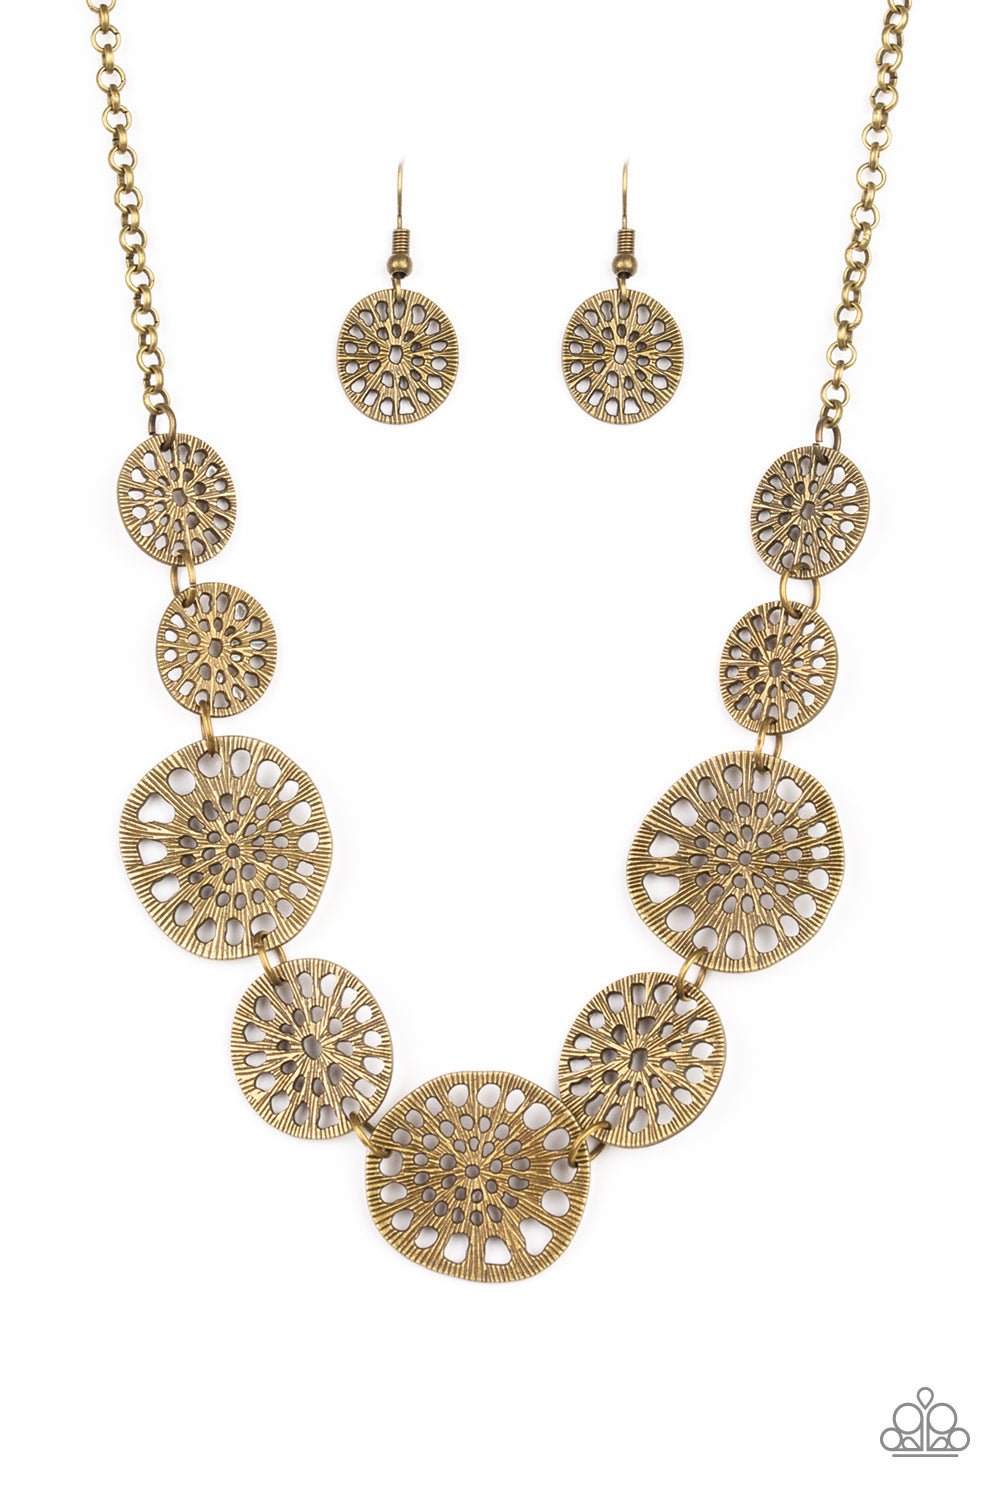 Your Own Free WHEEL Brass Paparazzi Necklace Cashmere Pink Jewels - Cashmere Pink Jewels & Accessories, Cashmere Pink Jewels & Accessories - Paparazzi